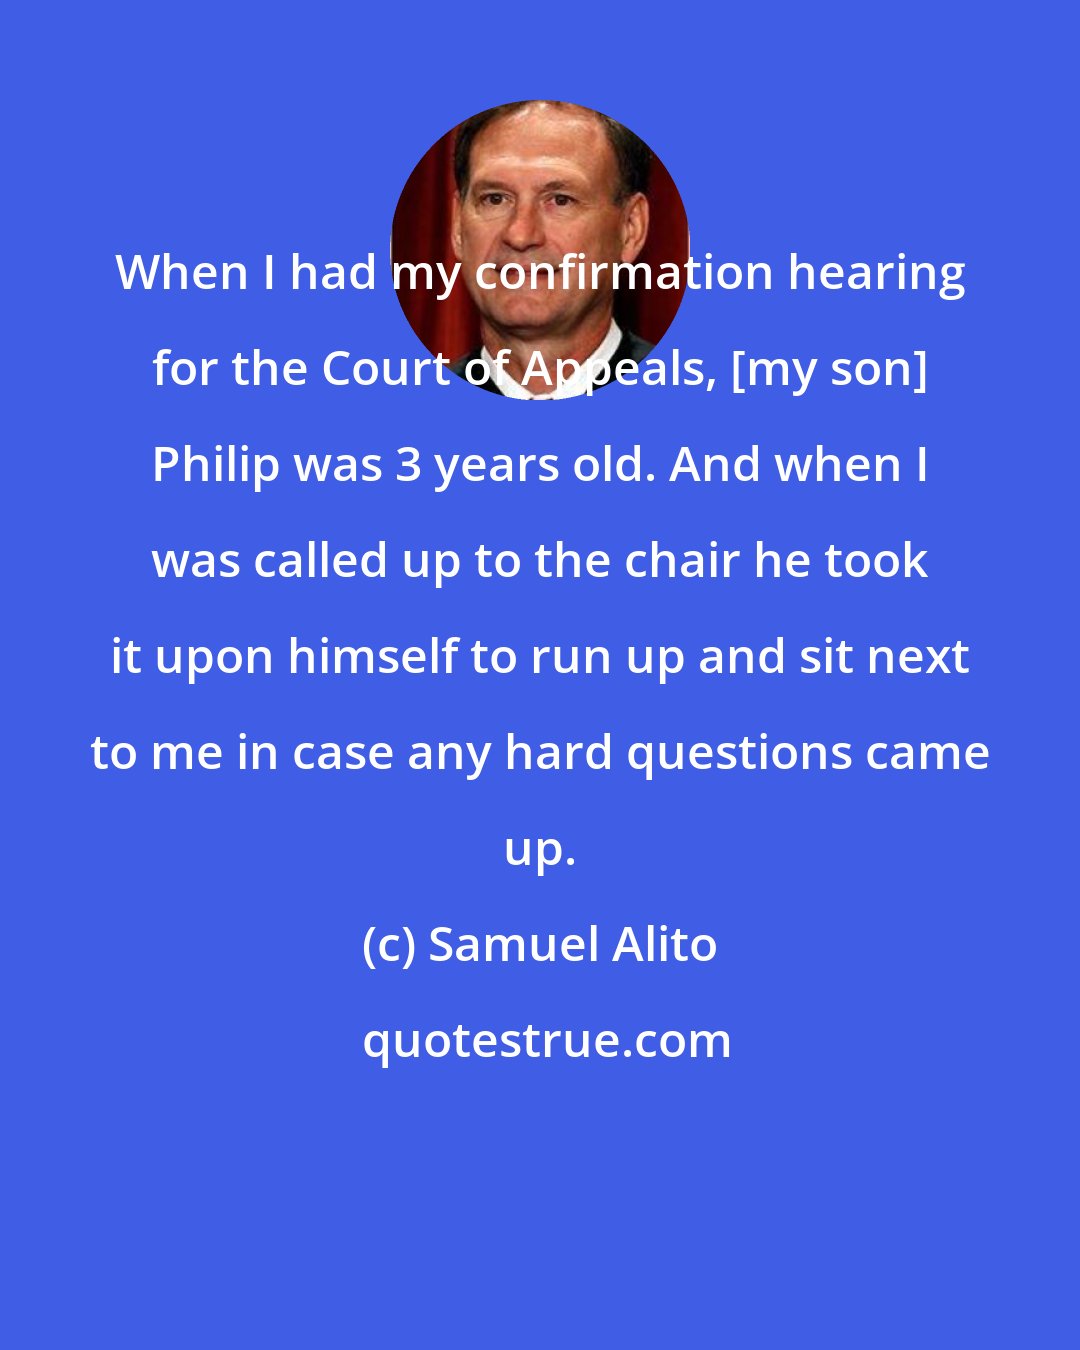 Samuel Alito: When I had my confirmation hearing for the Court of Appeals, [my son] Philip was 3 years old. And when I was called up to the chair he took it upon himself to run up and sit next to me in case any hard questions came up.